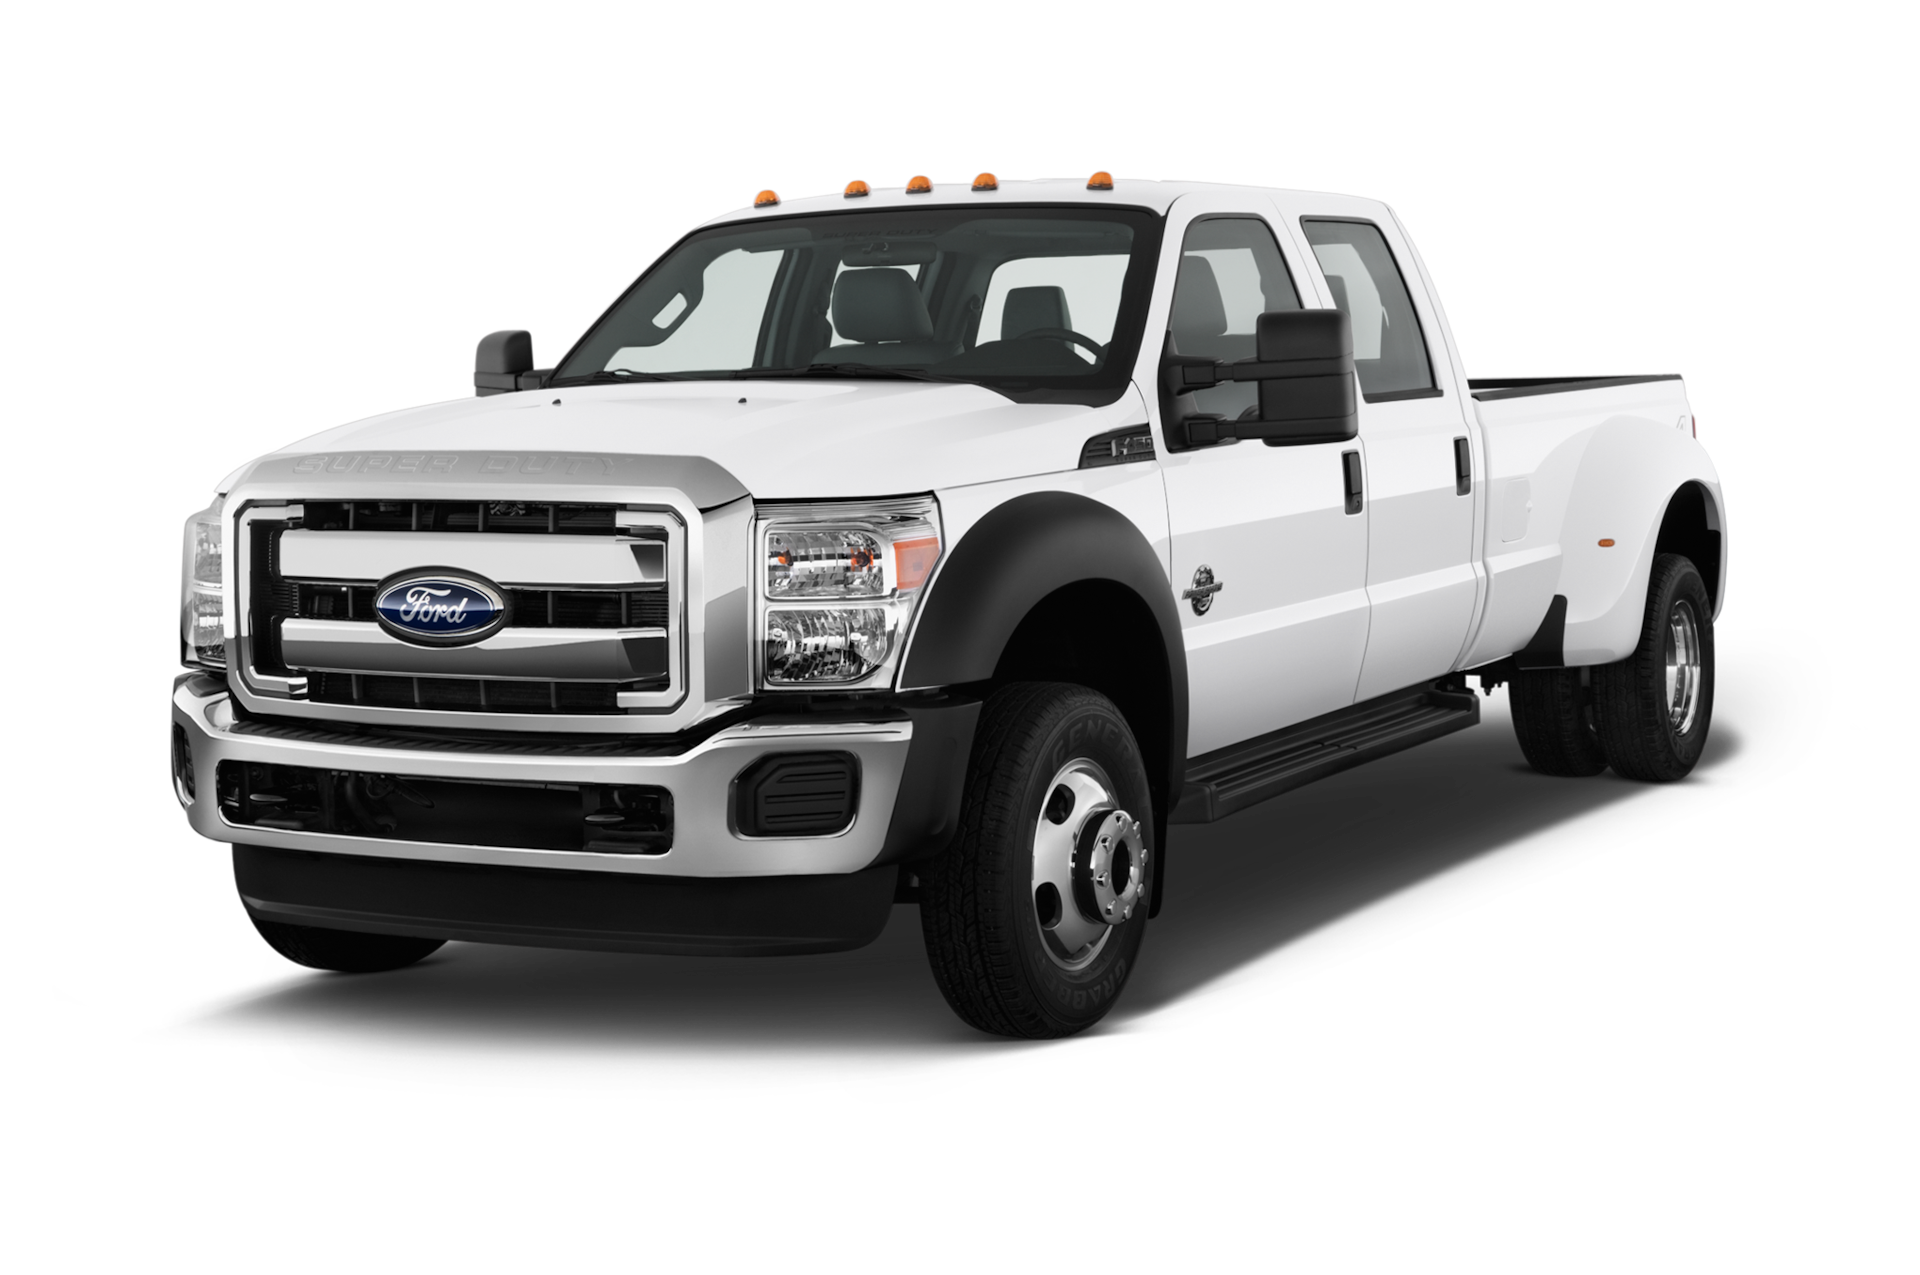 2016 Ford F-450 Prices, Reviews, and Photos - MotorTrend